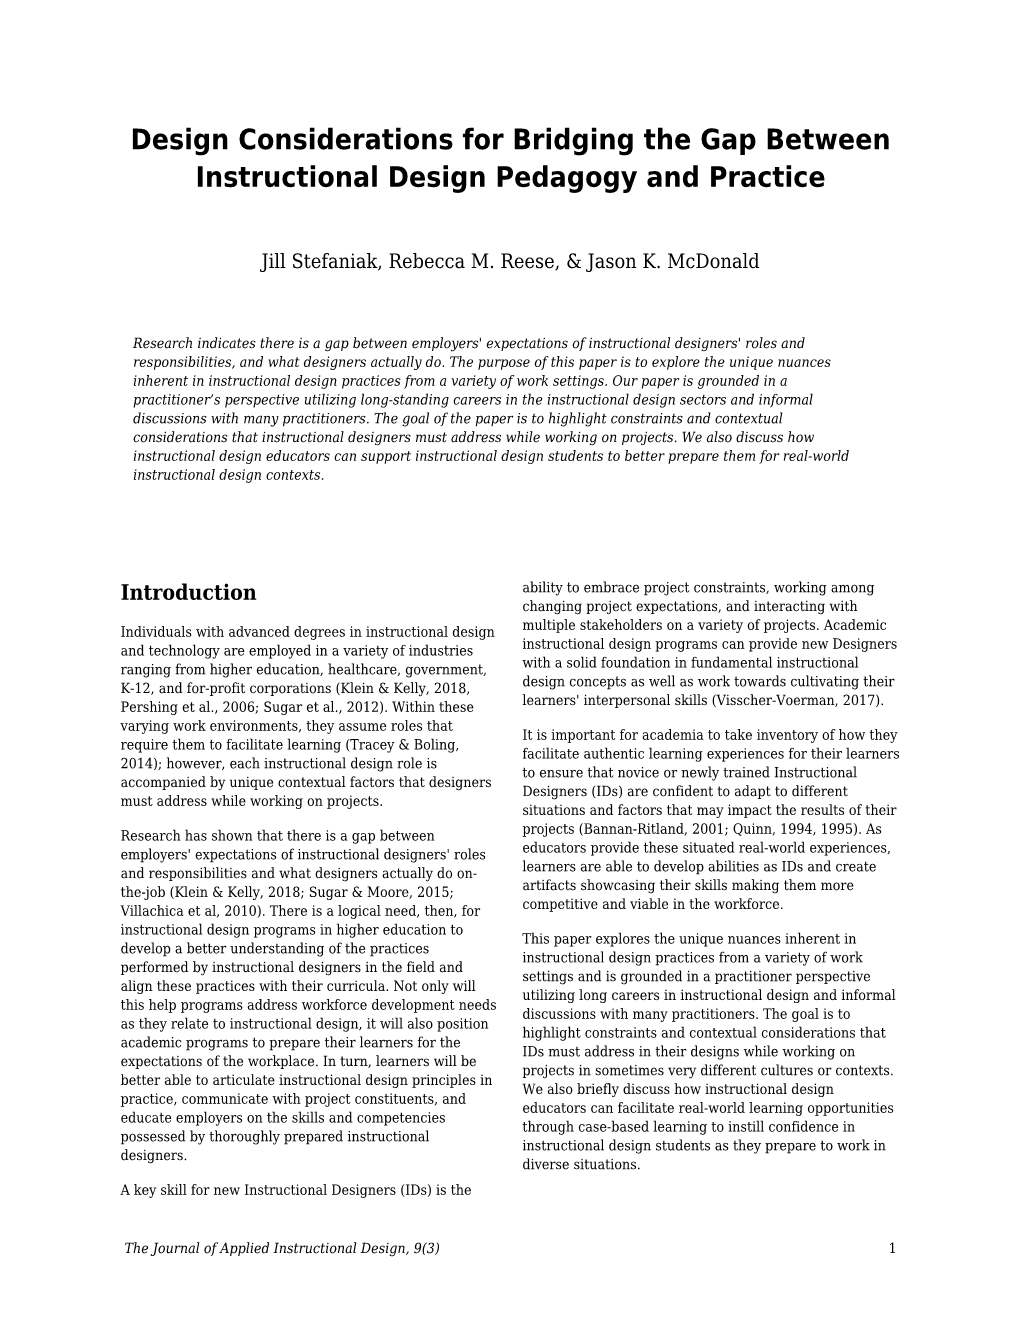 Design Considerations for Bridging the Gap Between Instructional Design Pedagogy and Practice